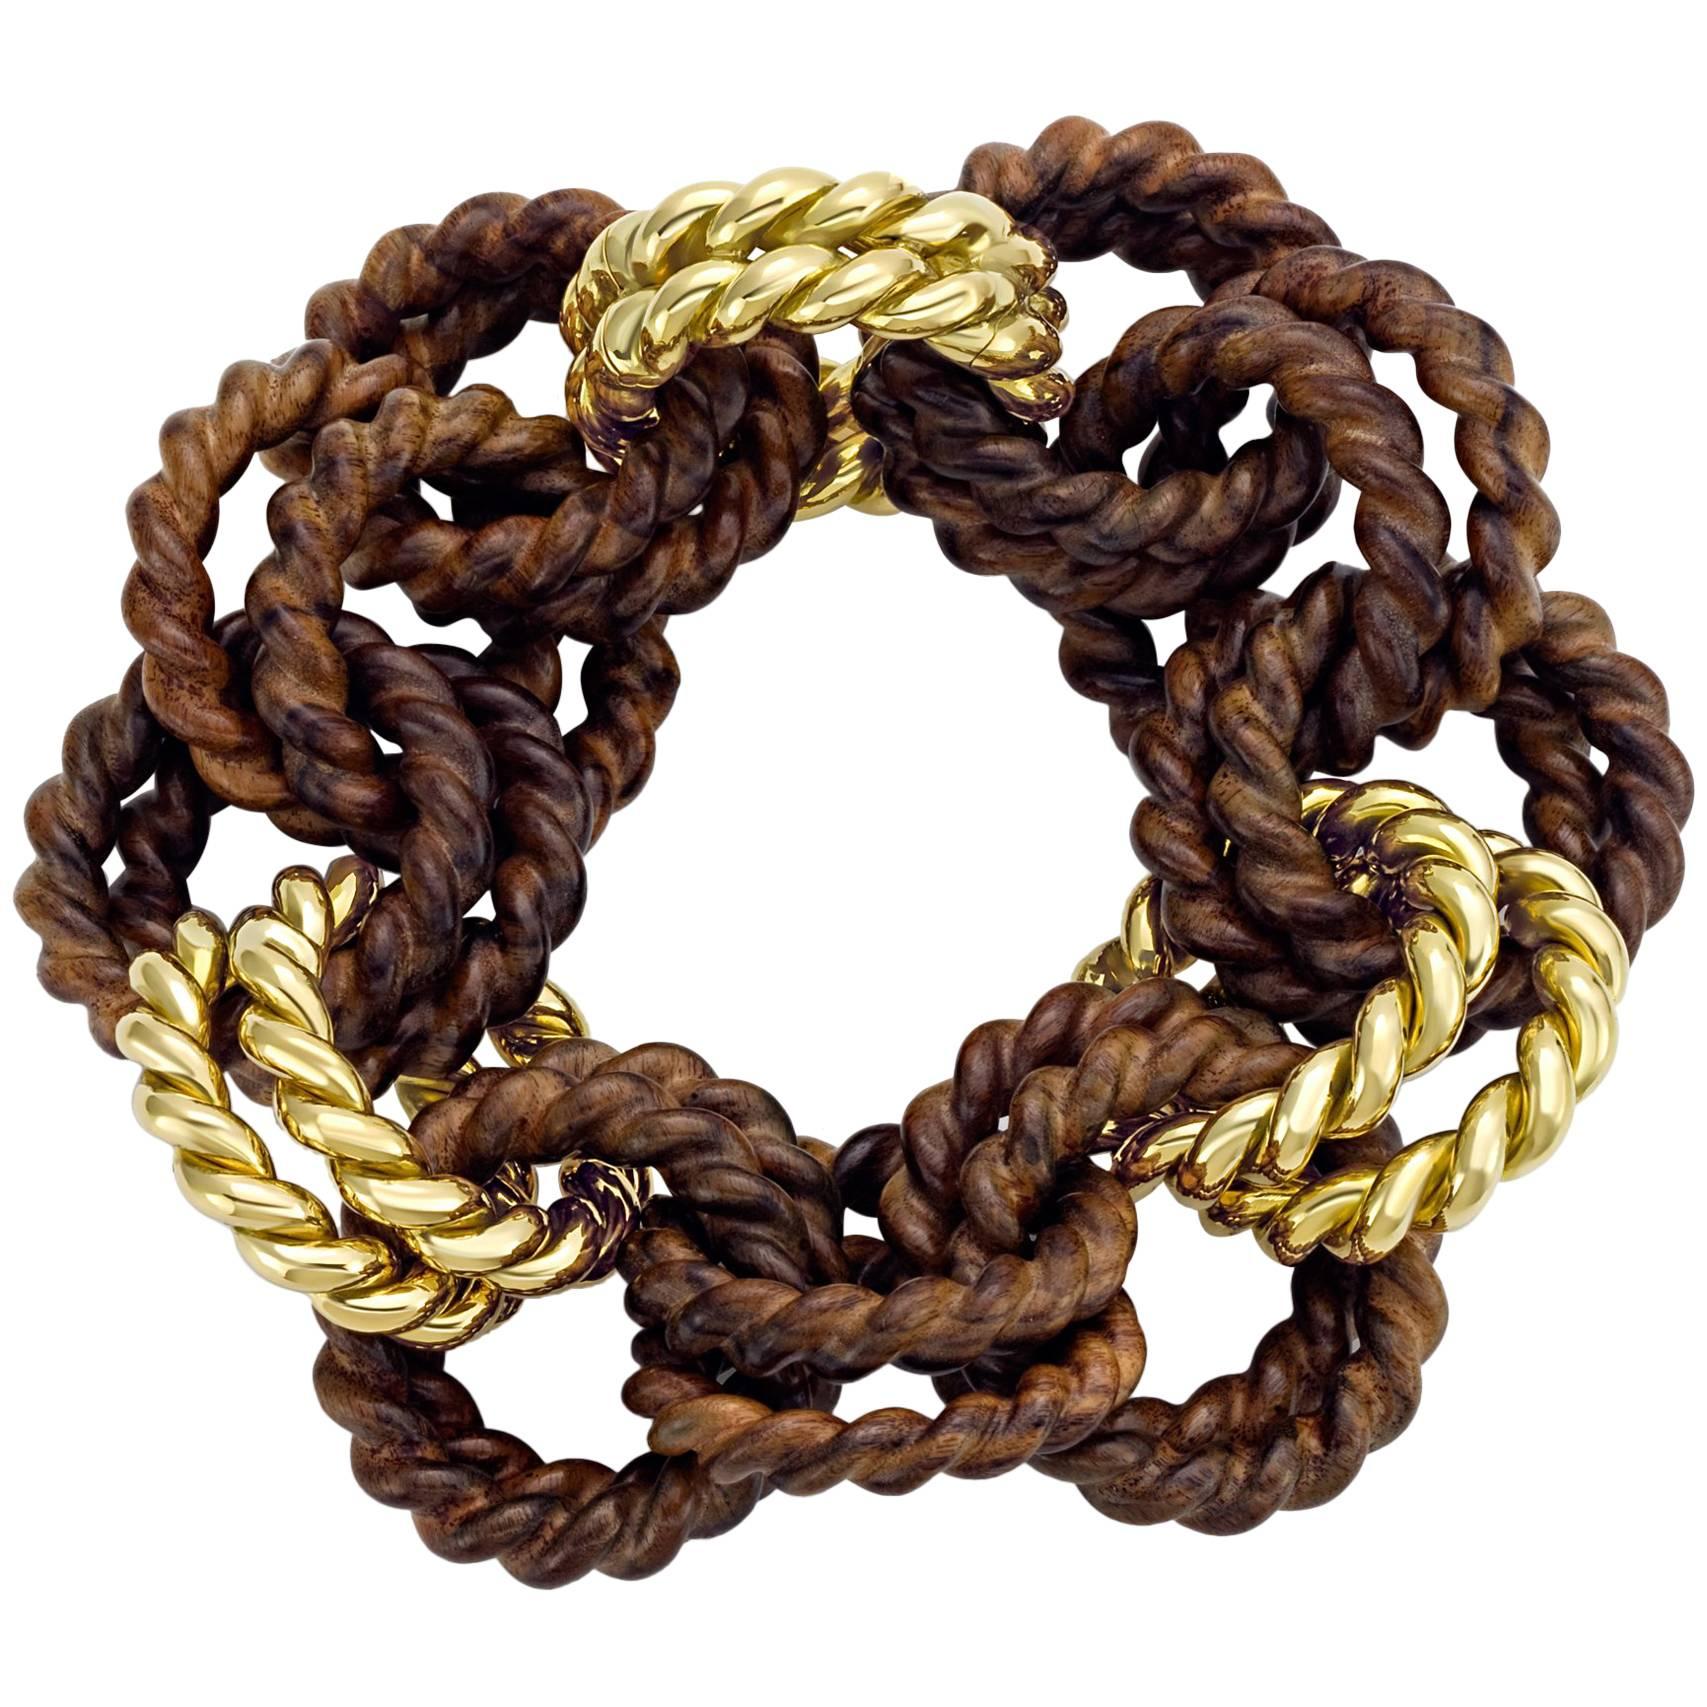 Bracelet from the Collection "Rope" 18 Karat Yellow Gold and Rosewood